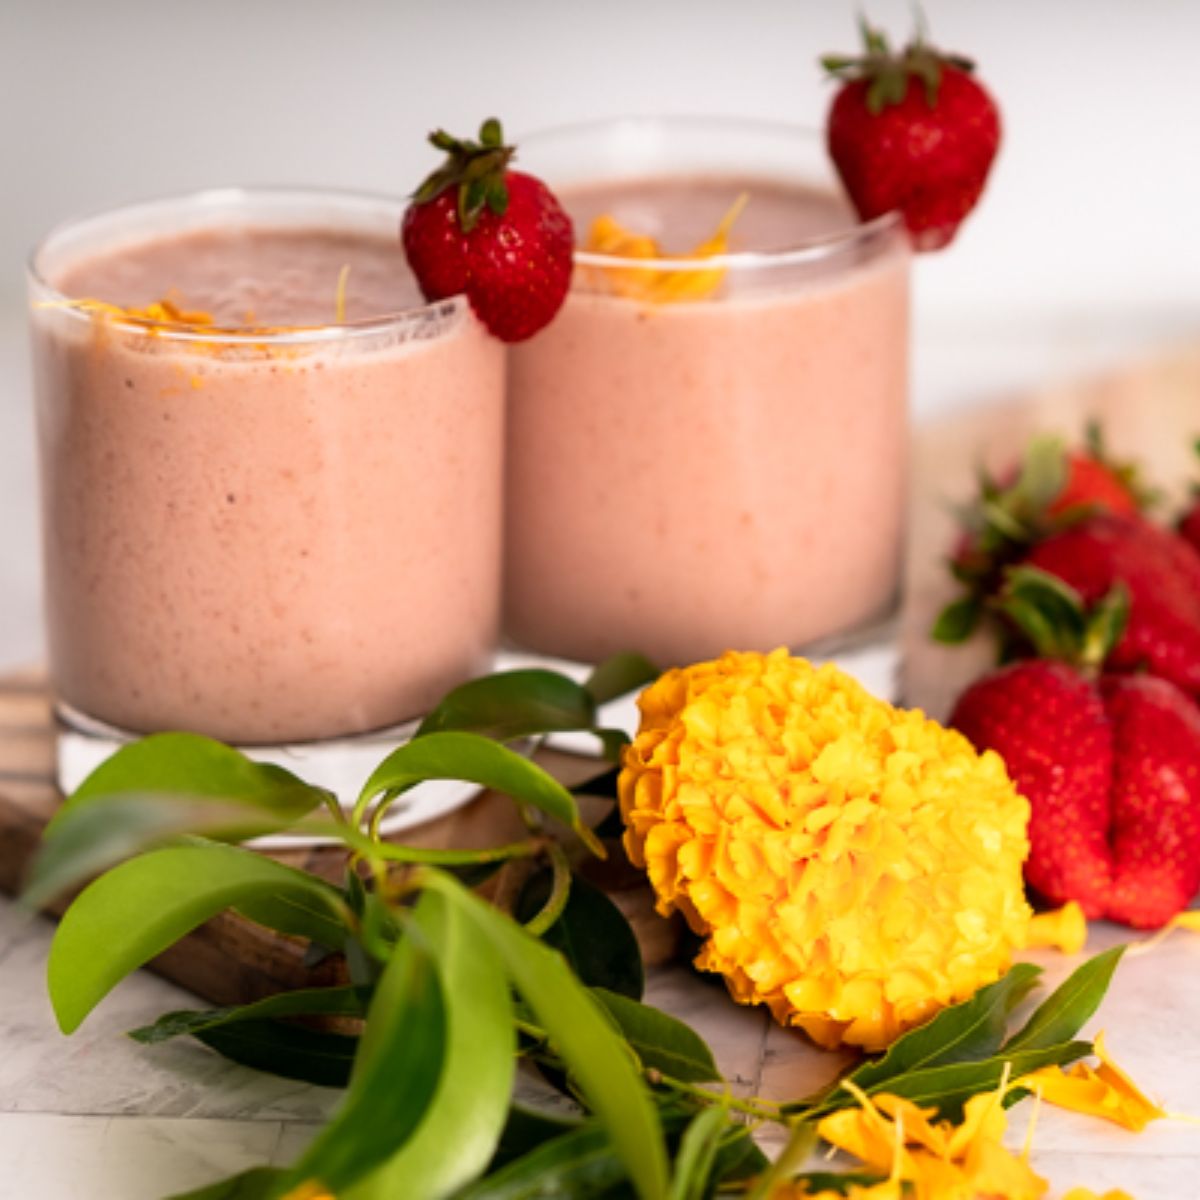 Panera Strawberry Banana Smoothie Recipe Copycat in two short glasses with a strawberry garnish and spring flowers props